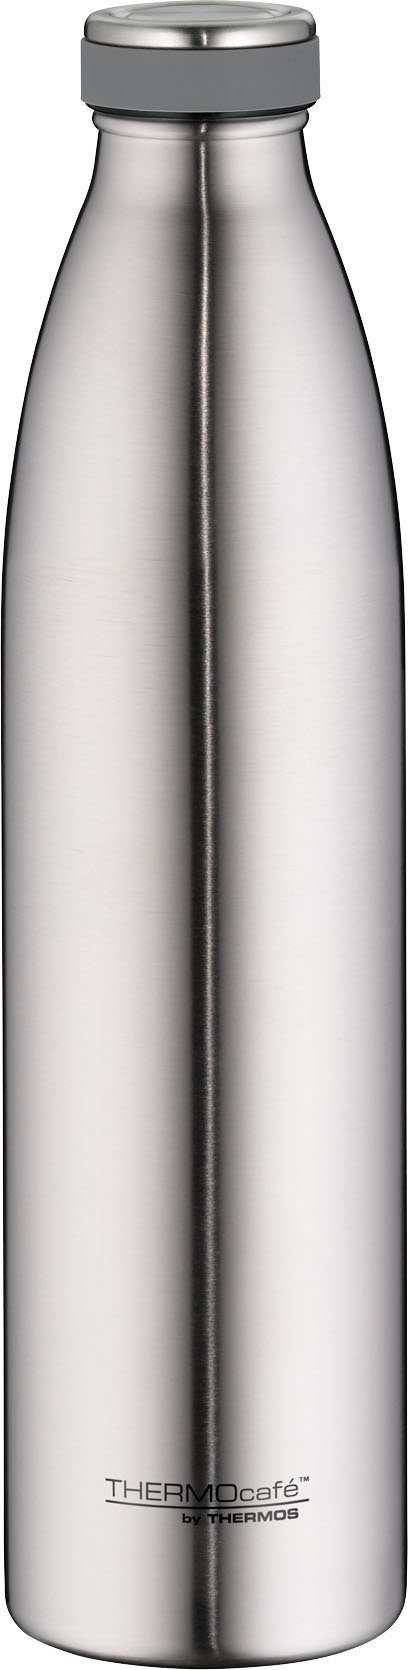 silberfarben THERMOS Thermo Cafe Thermoflasche